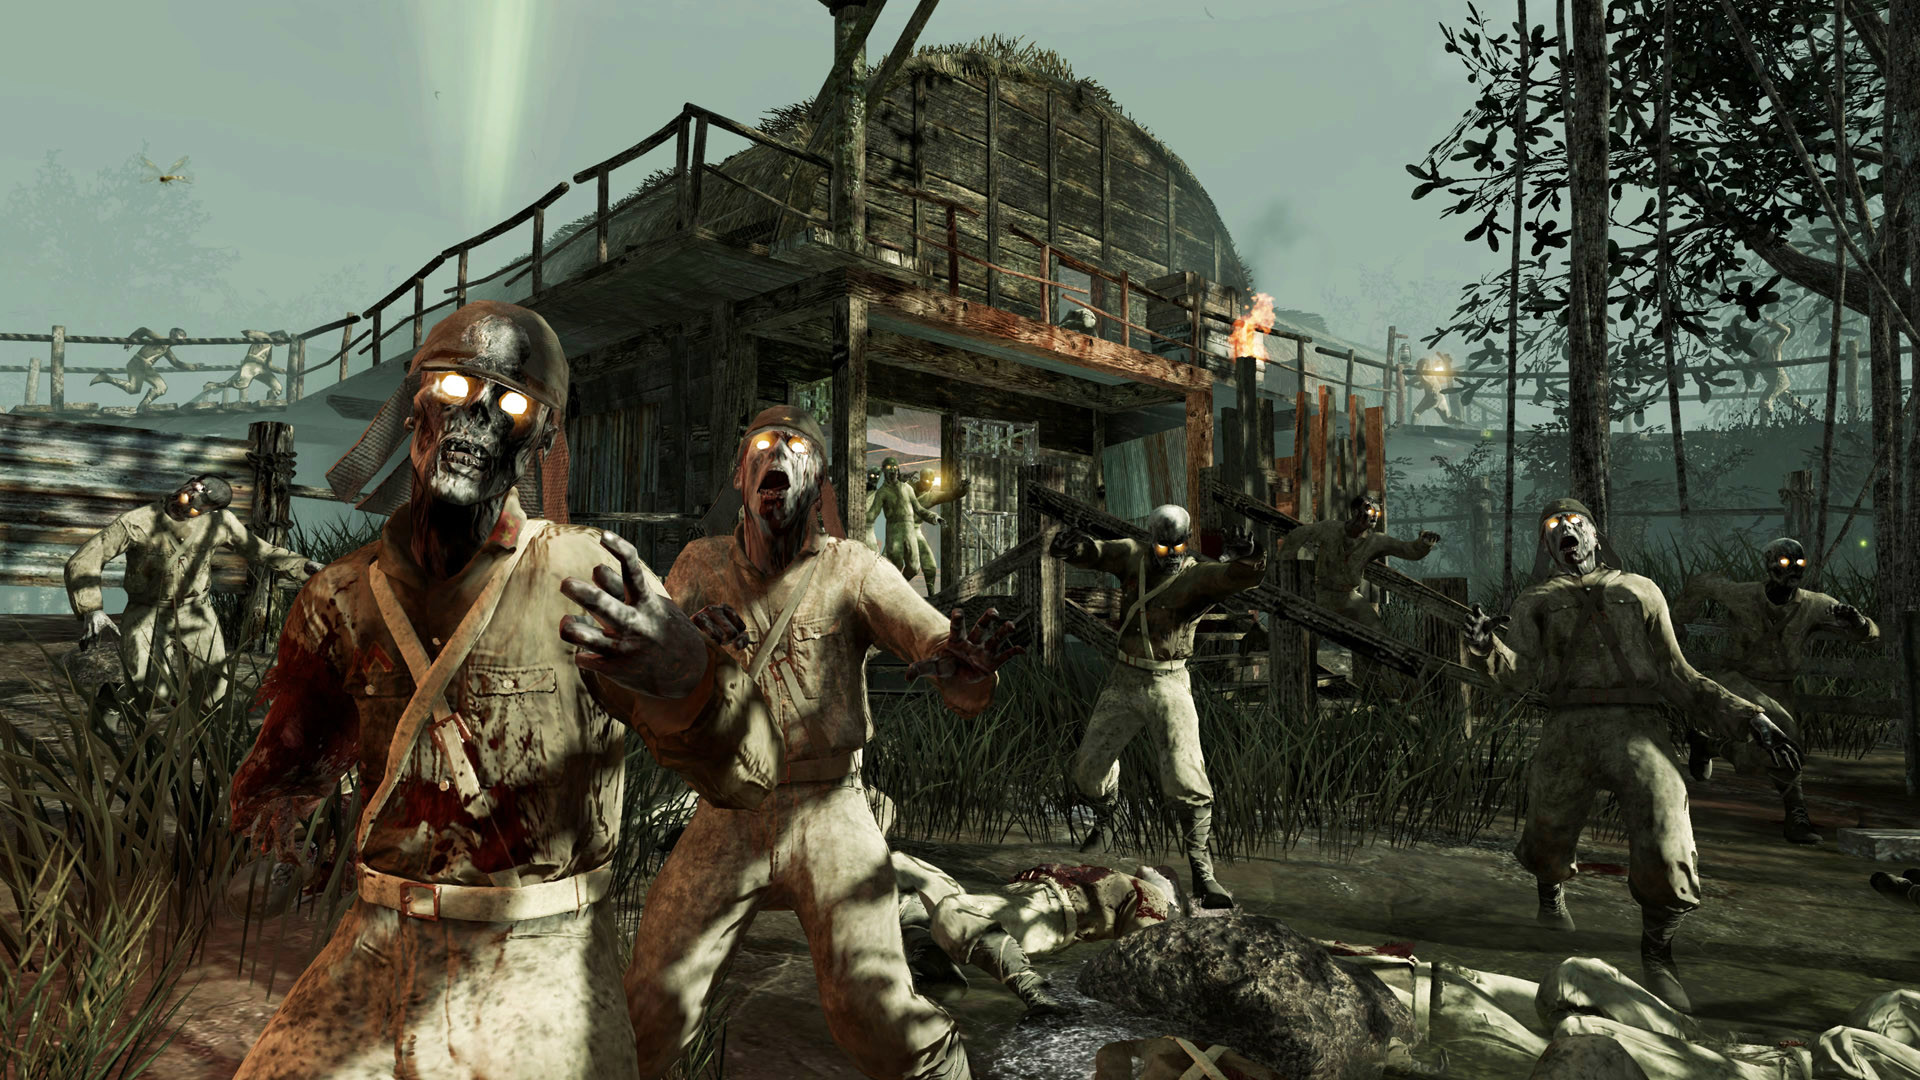 1920x1080 I don't know if you mean this kind of nazi zombies. I know